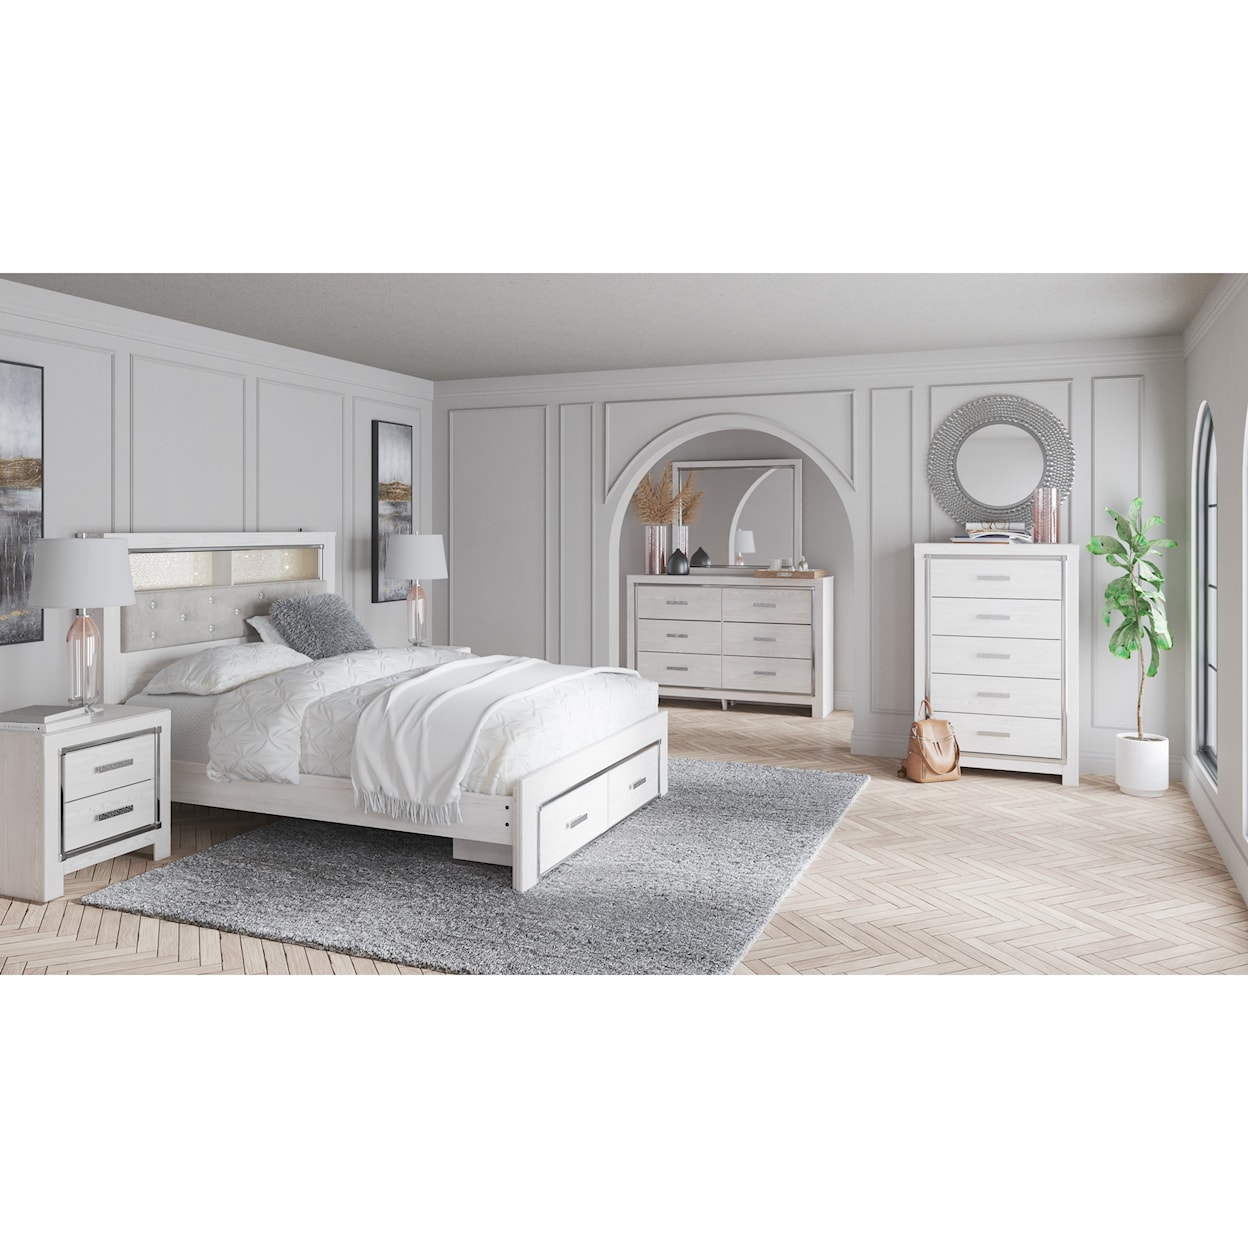 Signature Design by Ashley Altyra Queen Bedroom Group